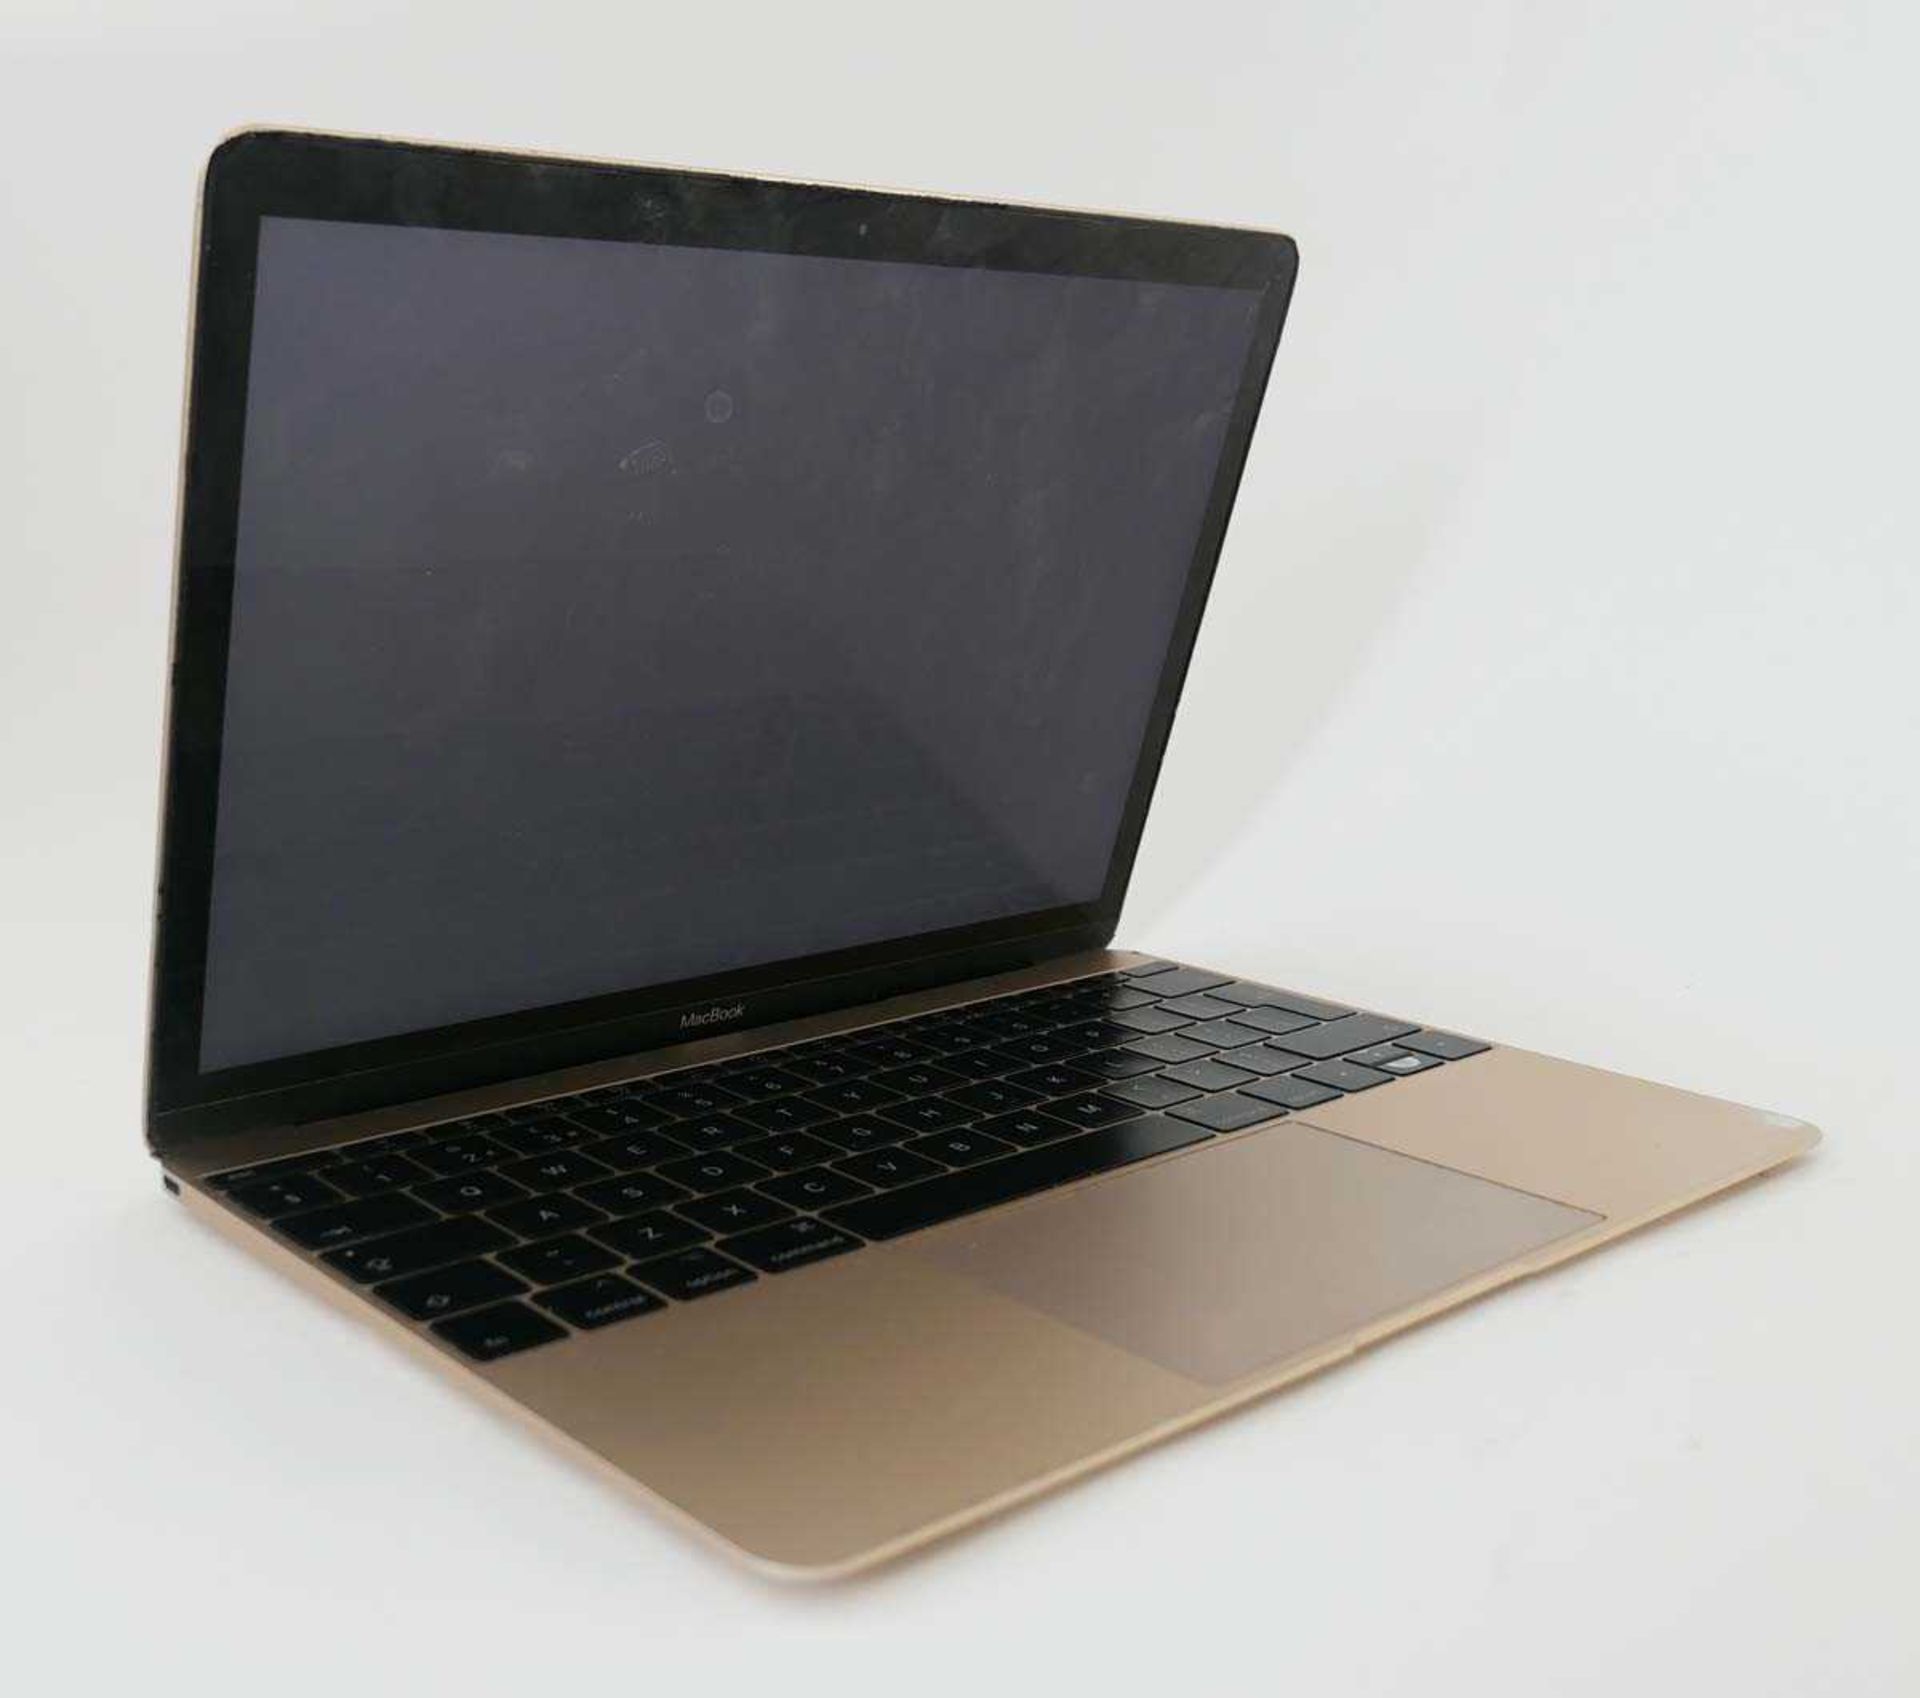 +VAT MacBook 13" 2017 A1534 Gold laptop with Intel Core M3 1.2GHz, 8GB RAM and 256GB SSD (screen